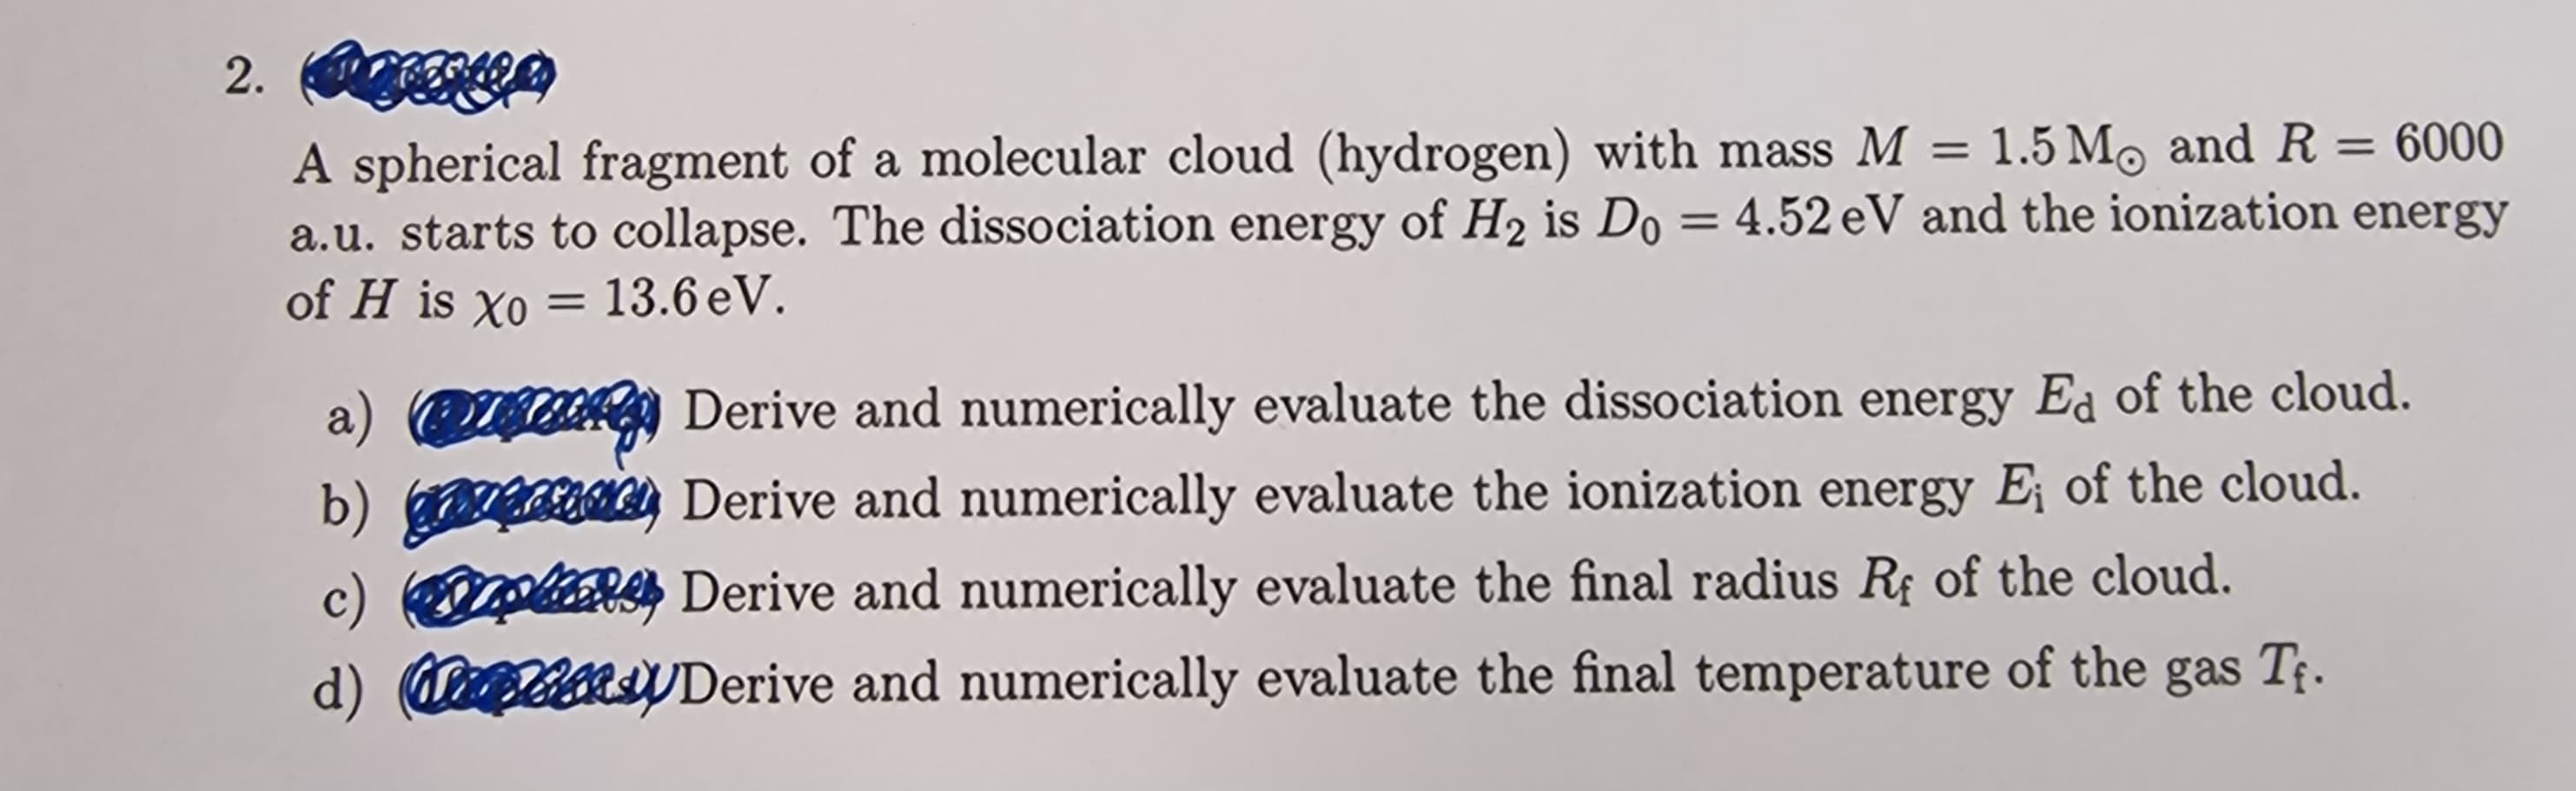 2. (e)
A spherical fragment of a molecular cloud (hydrogen) with mass M = 1.5 Mo and R = 6000
a.u. starts to collapse. The dissociation energy of H₂ is Do = 4.52 eV and the ionization energy
of H is Xo = 13.6 eV.
a)
b) ge
Derive and numerically evaluate the dissociation energy Ed of the cloud.
Derive and numerically evaluate the ionization energy E; of the cloud.
c) pt Derive and numerically evaluate the final radius Rf of the cloud.
d) Casty Derive and numerically evaluate the final temperature of the gas T₁.